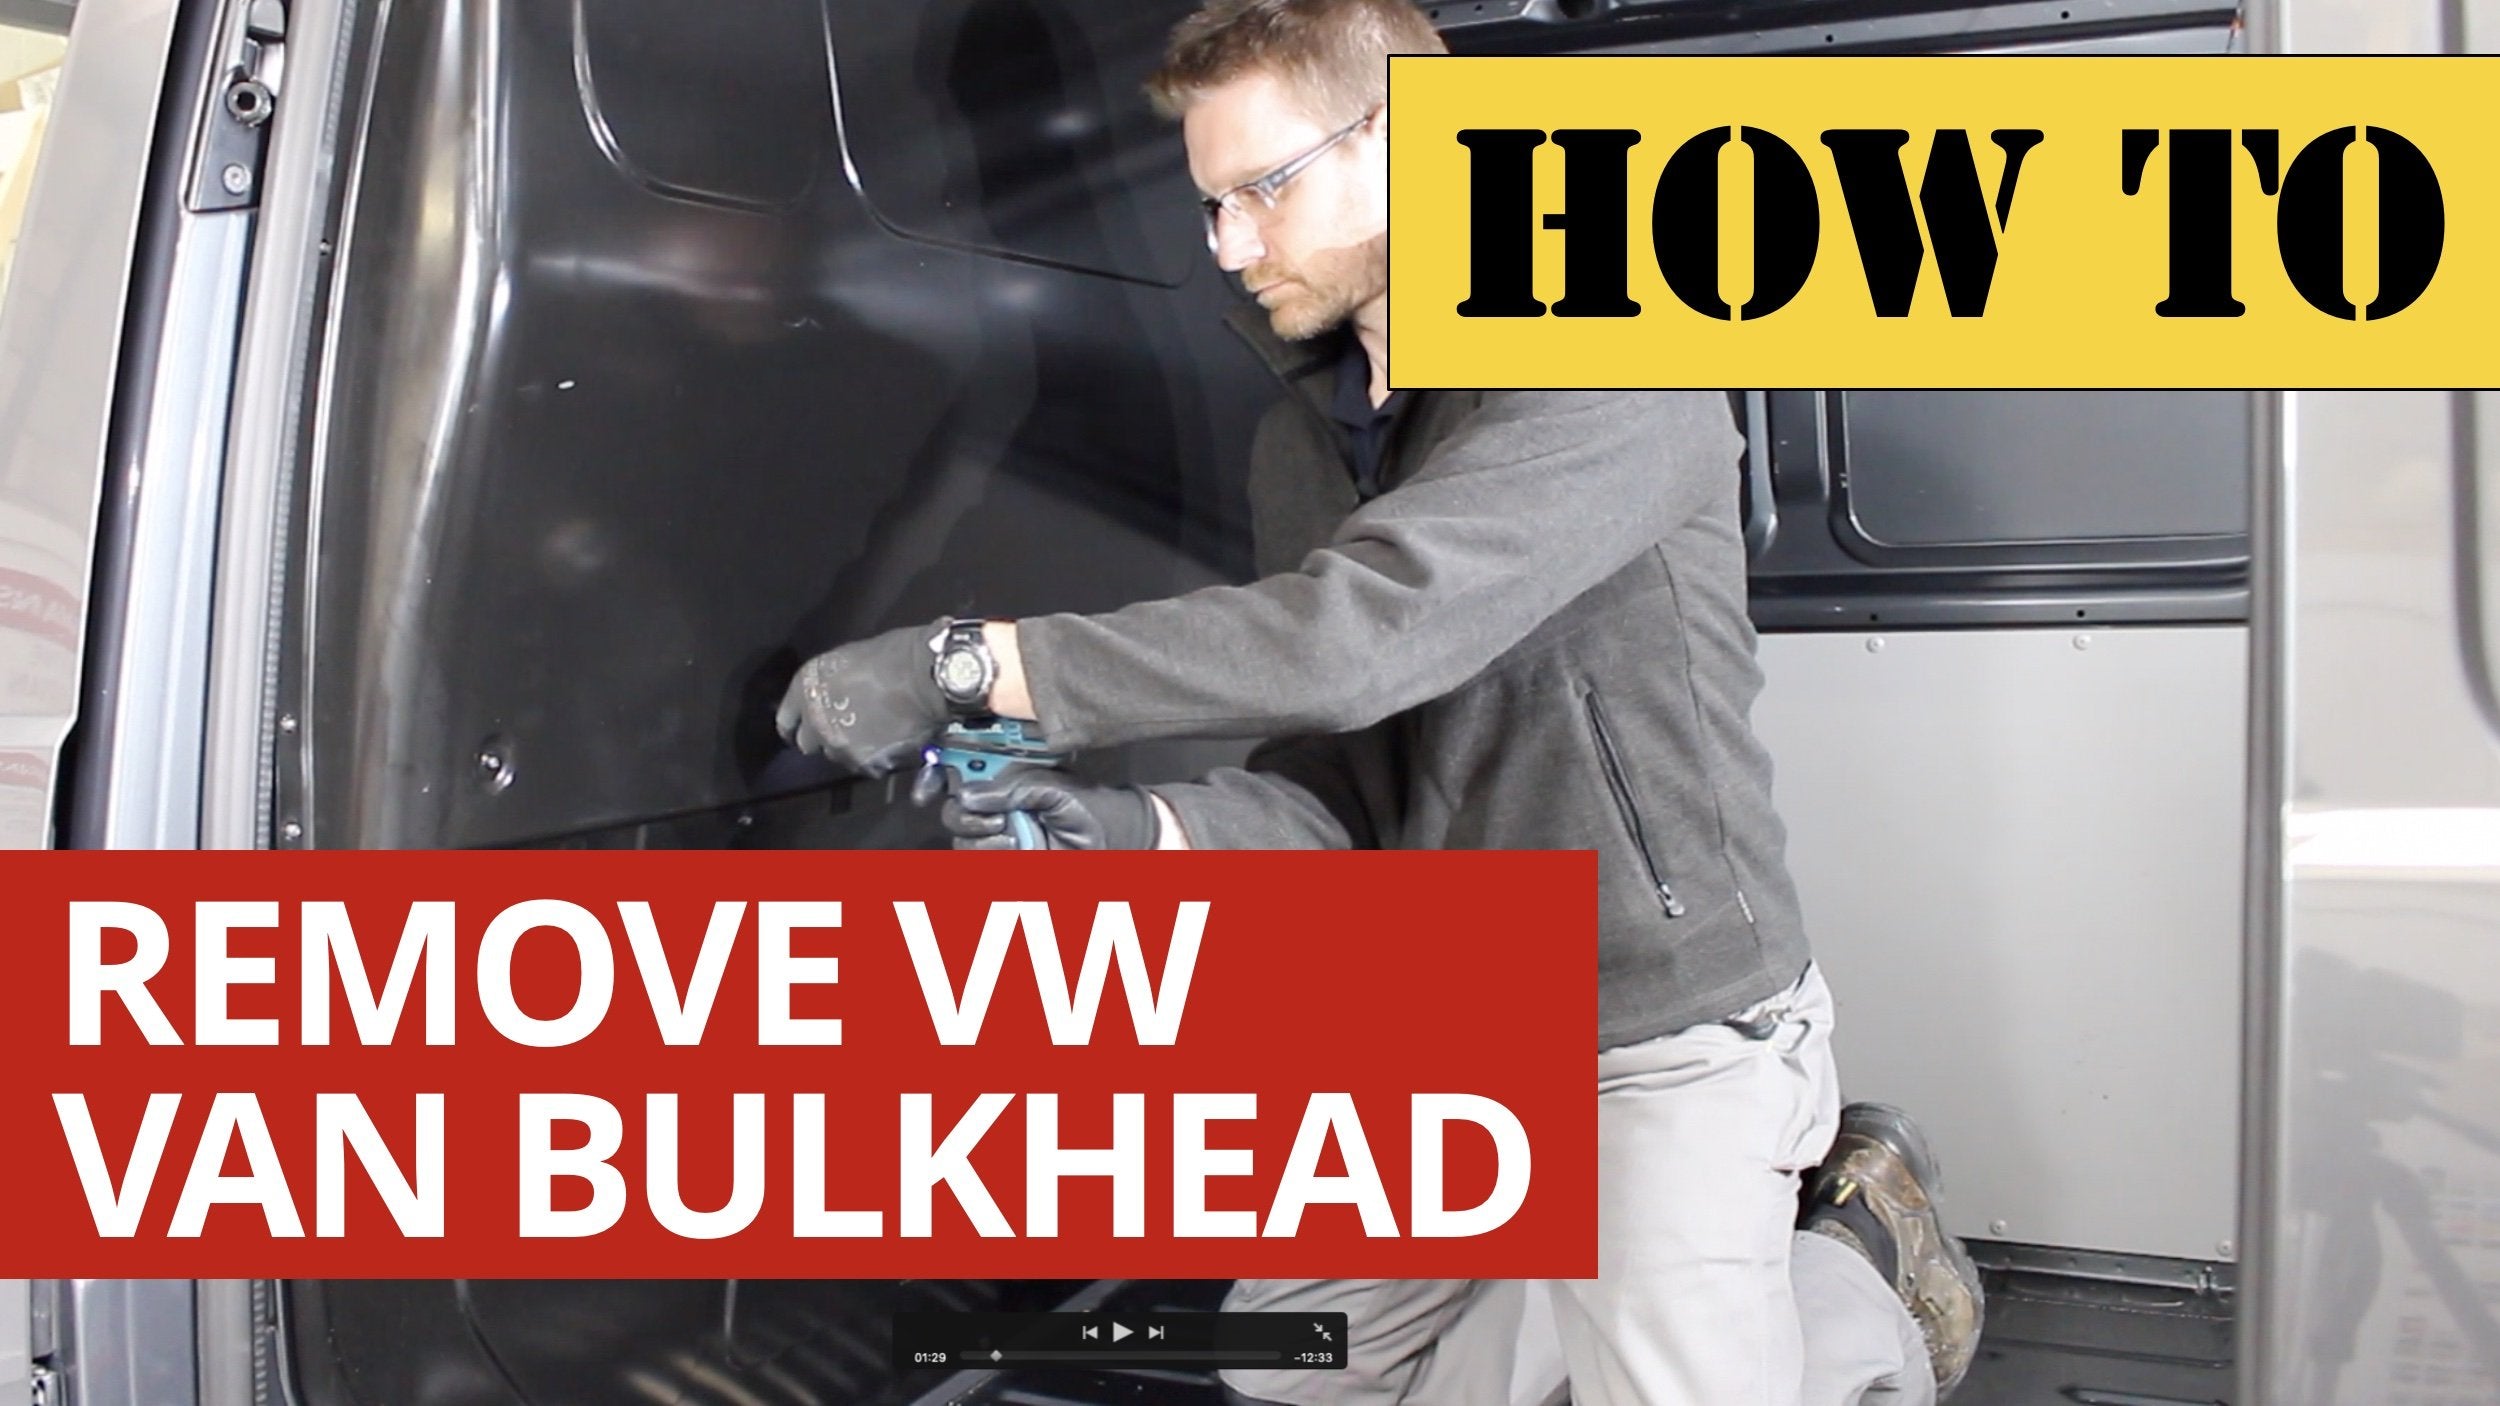 Video: How to Remove a Bulkhead from a VW T5 T6 Campervan